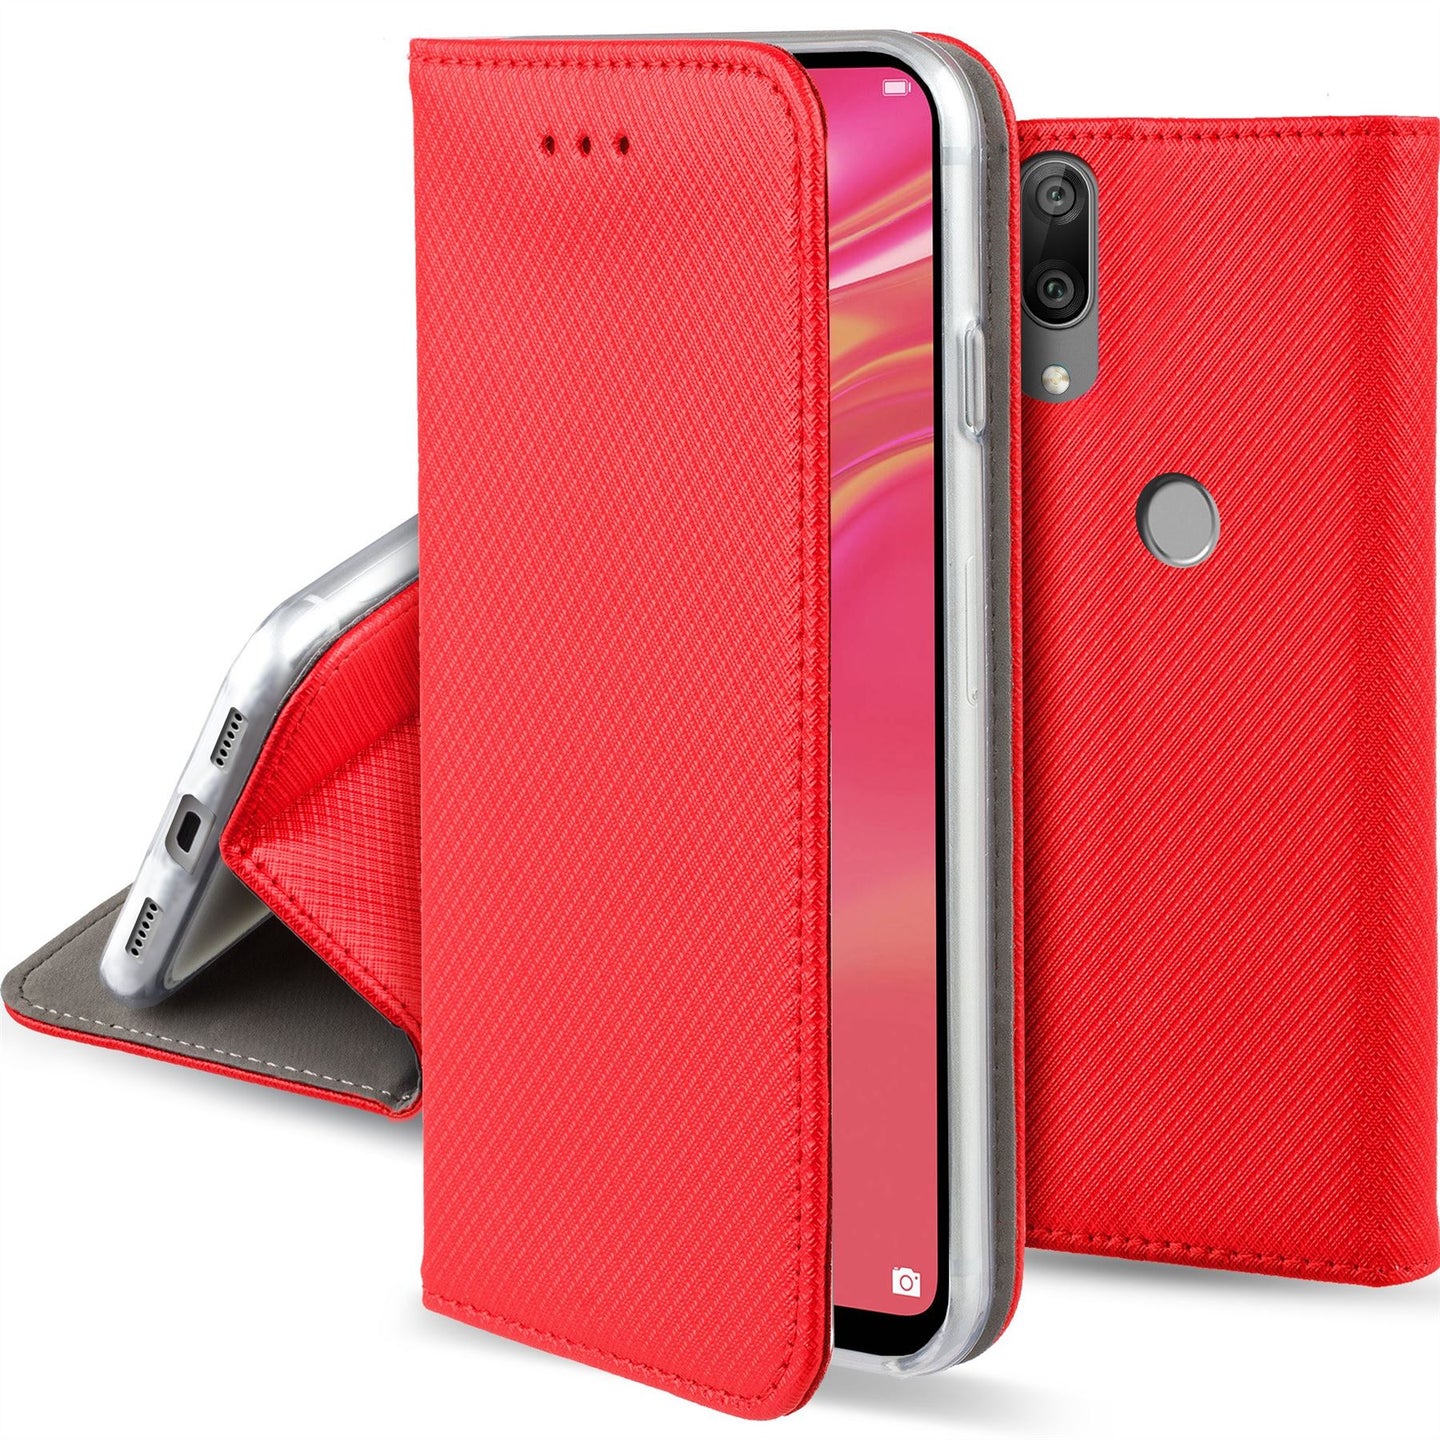 Moozy Case Flip Cover for Huawei Y7 2019, Huawei Y7 Prime 2019, Red - Smart Magnetic Flip Case with Card Holder and Stand